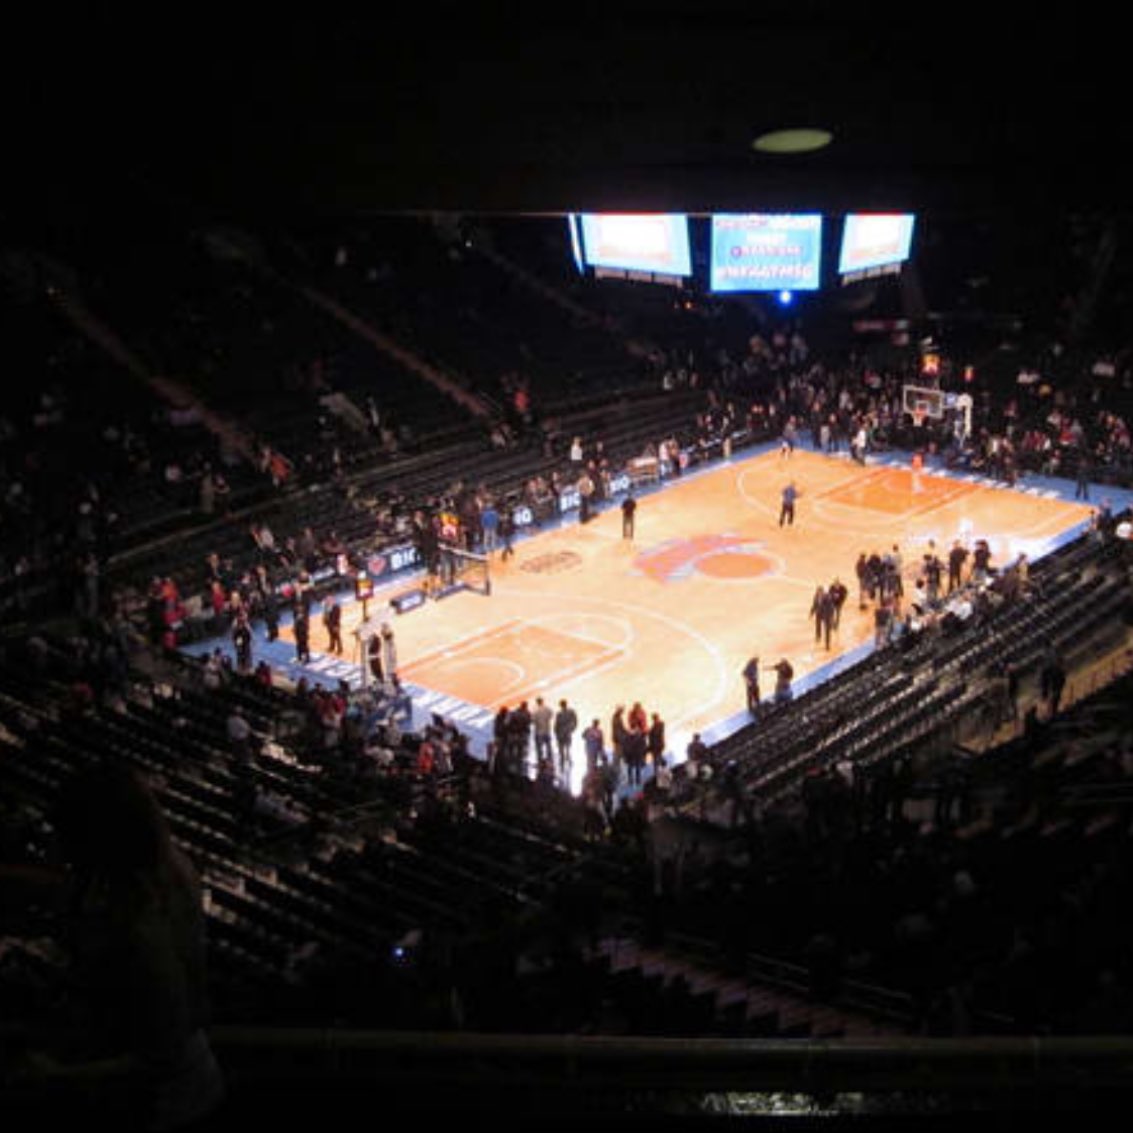 Cheapest single ticket to Knicks-76ers tonight at MSG? $625 all in at @TickPick. Here’s your view…